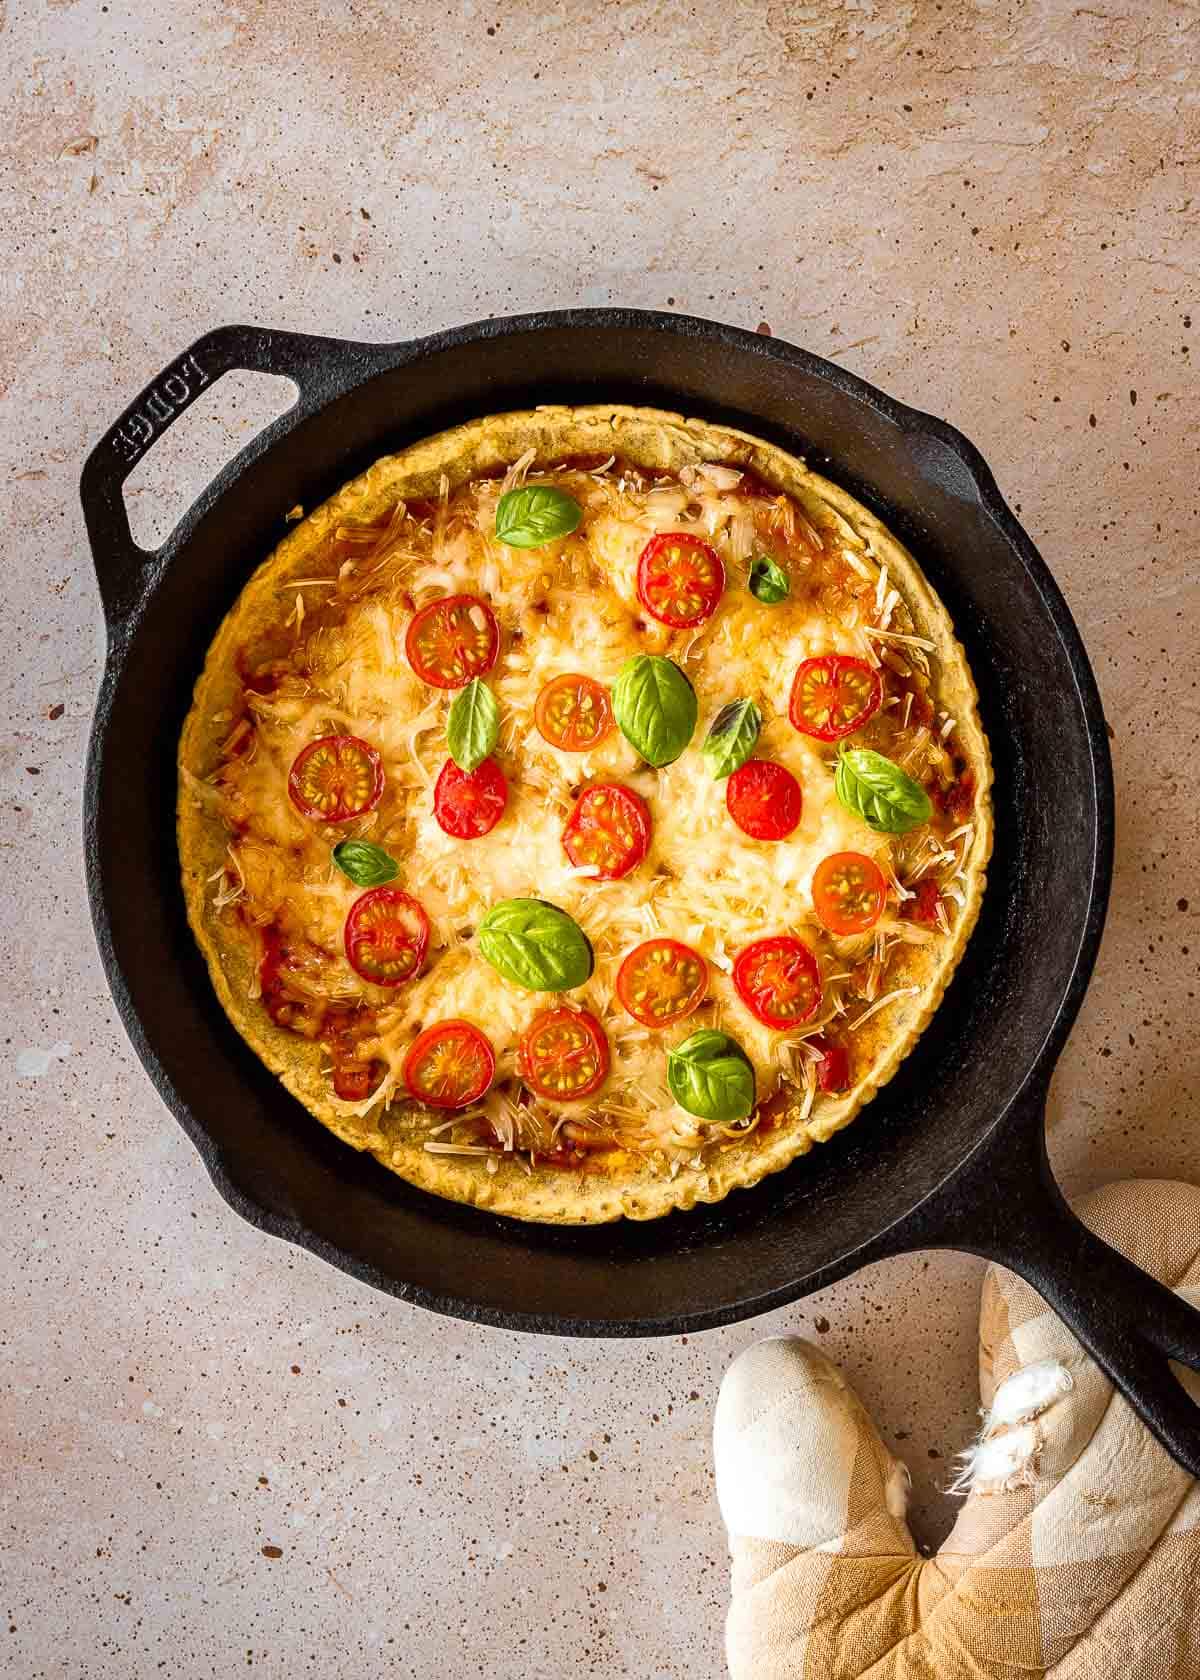 A pizza with chickpea flour pizza crust in a cast iron pan